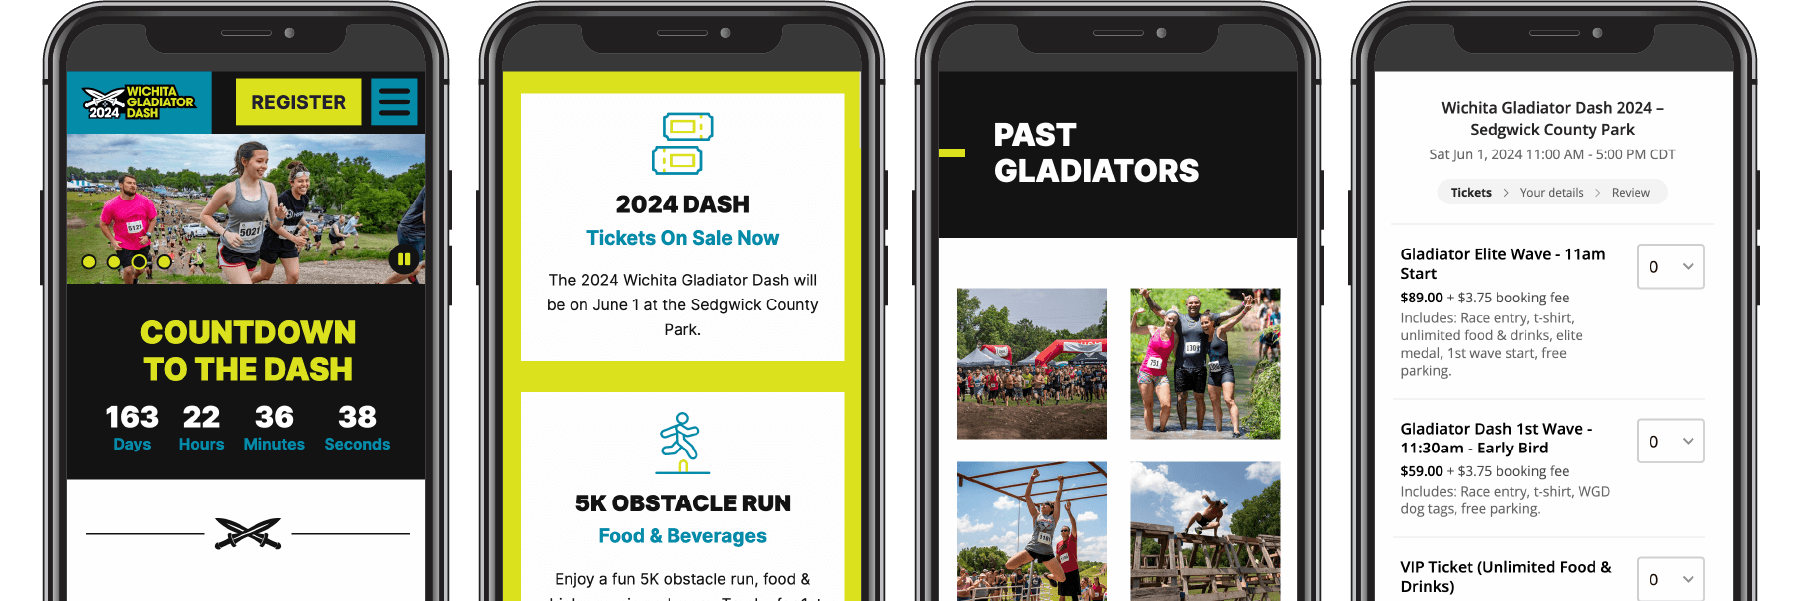 Four pages of the Wichita Gladiator Dash website displayed on four phones.